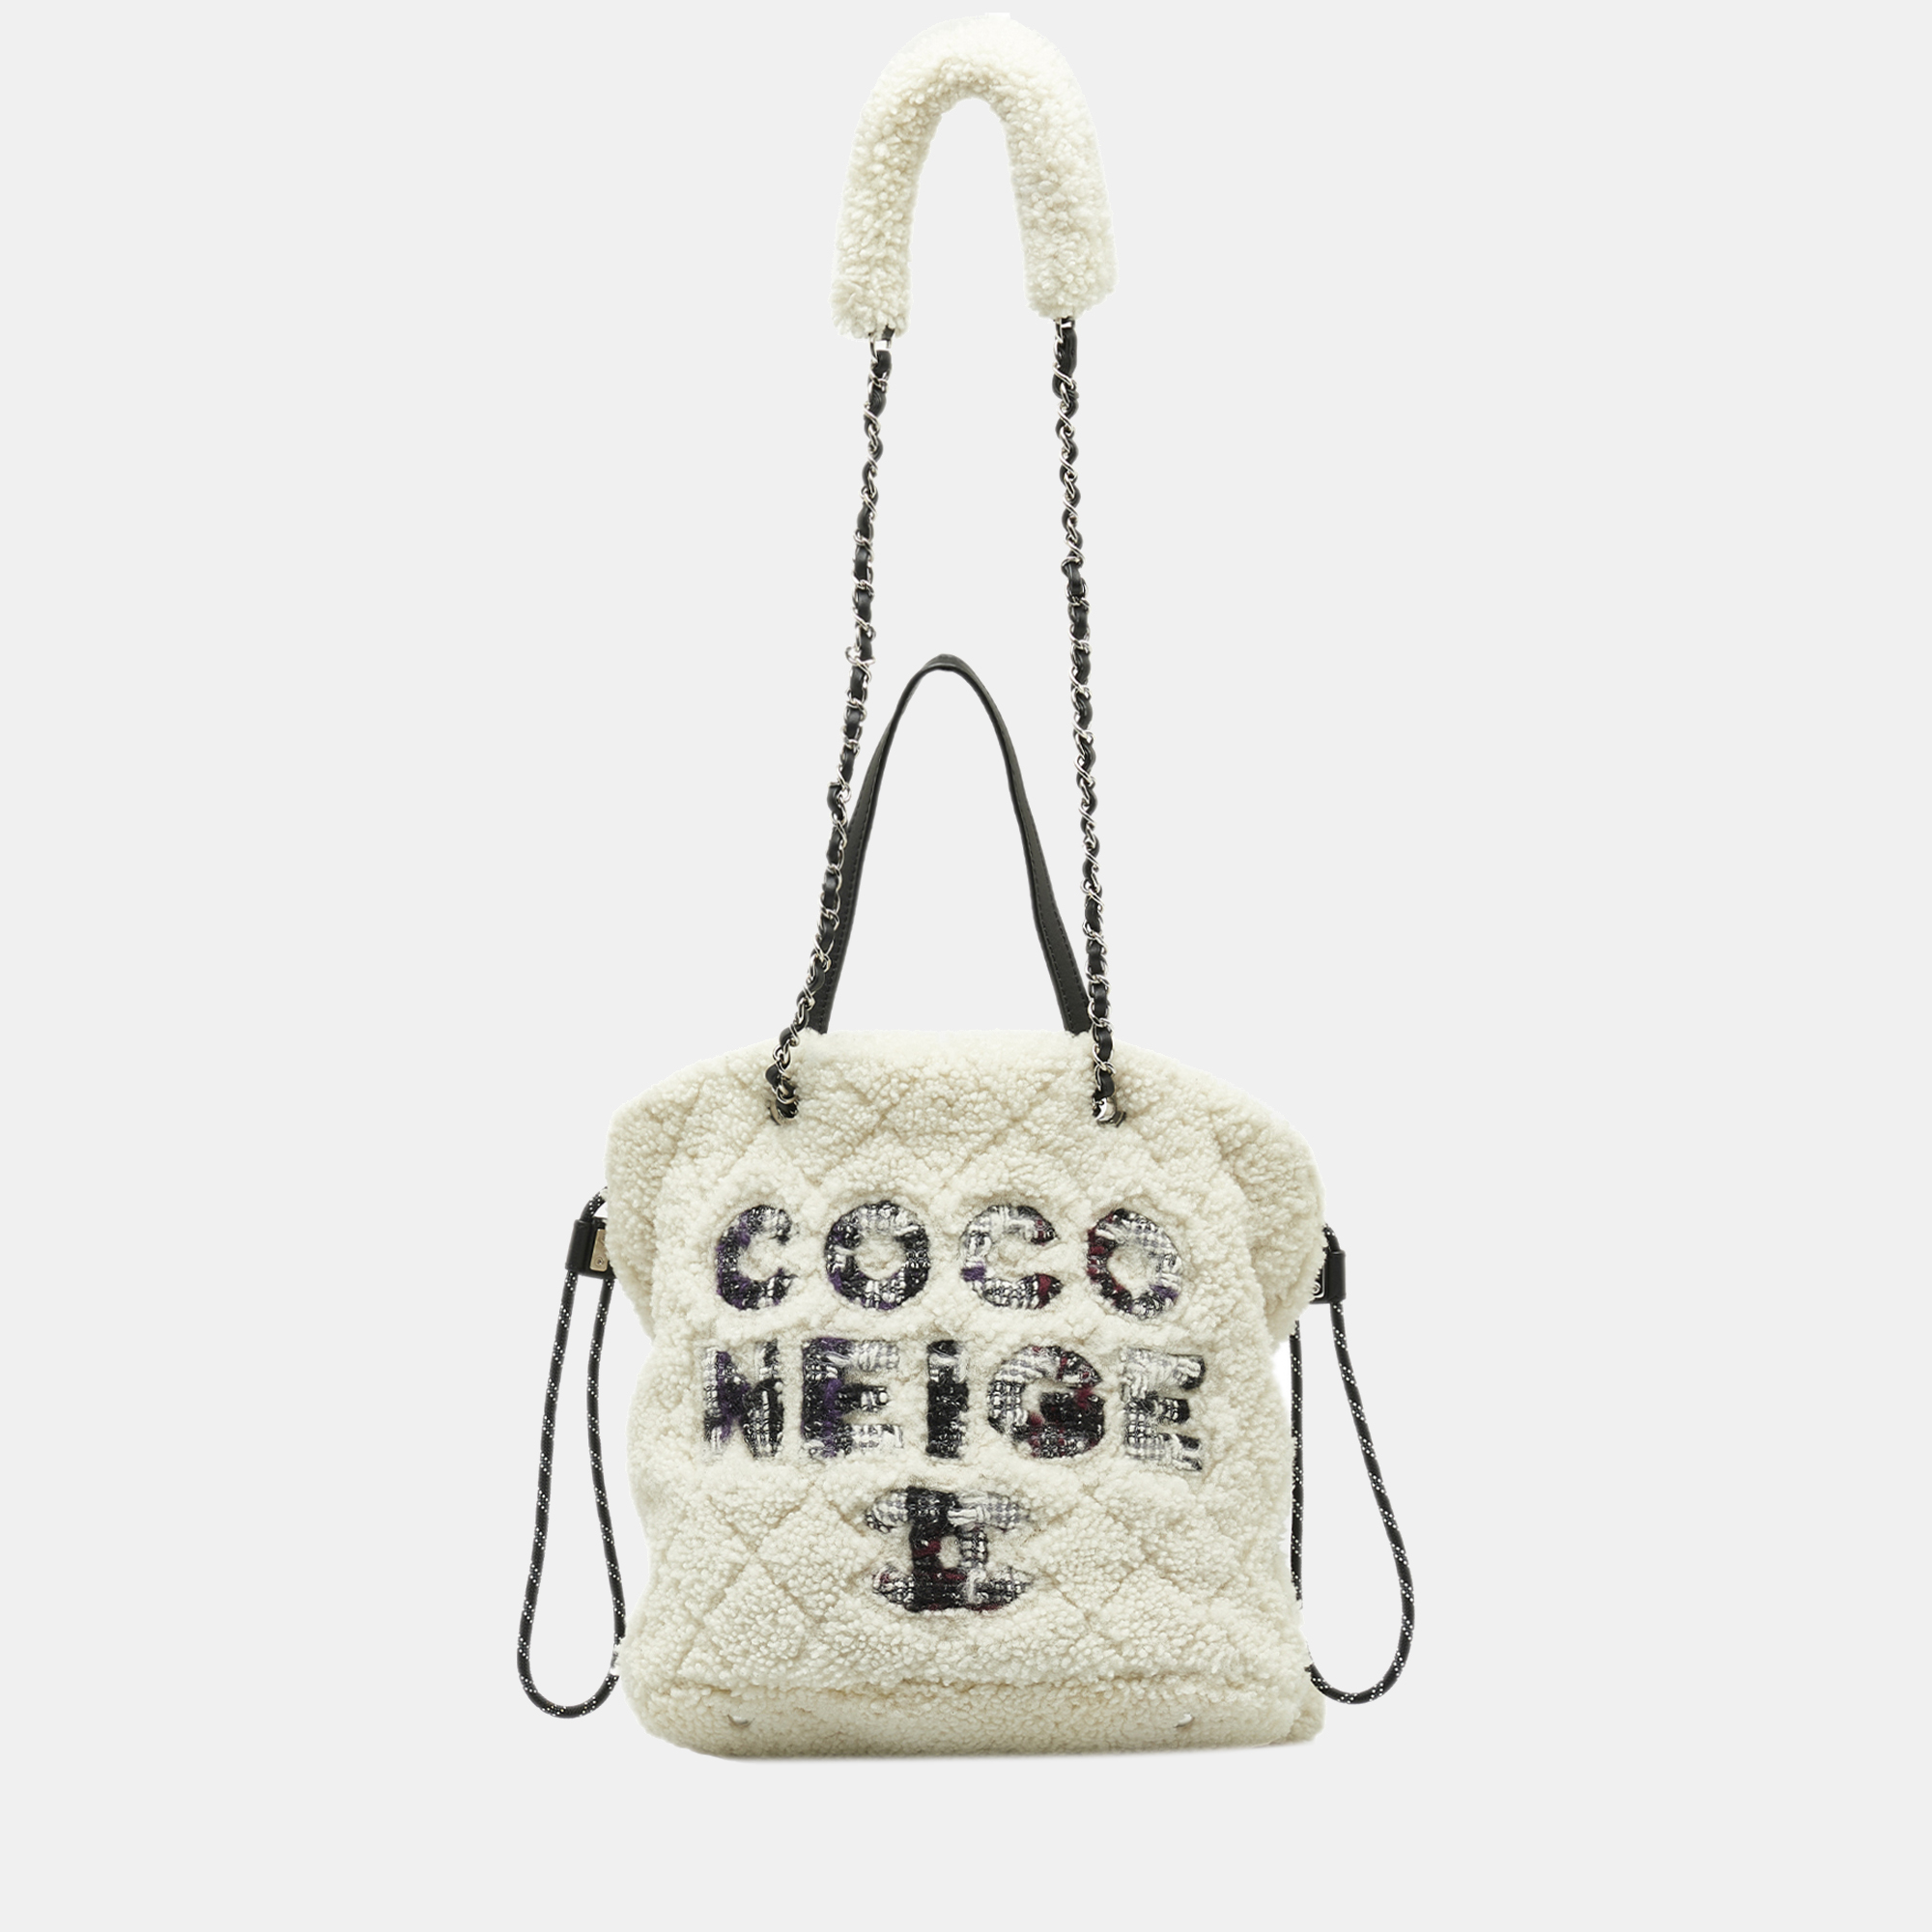 Chanel white shearling coco neige tote